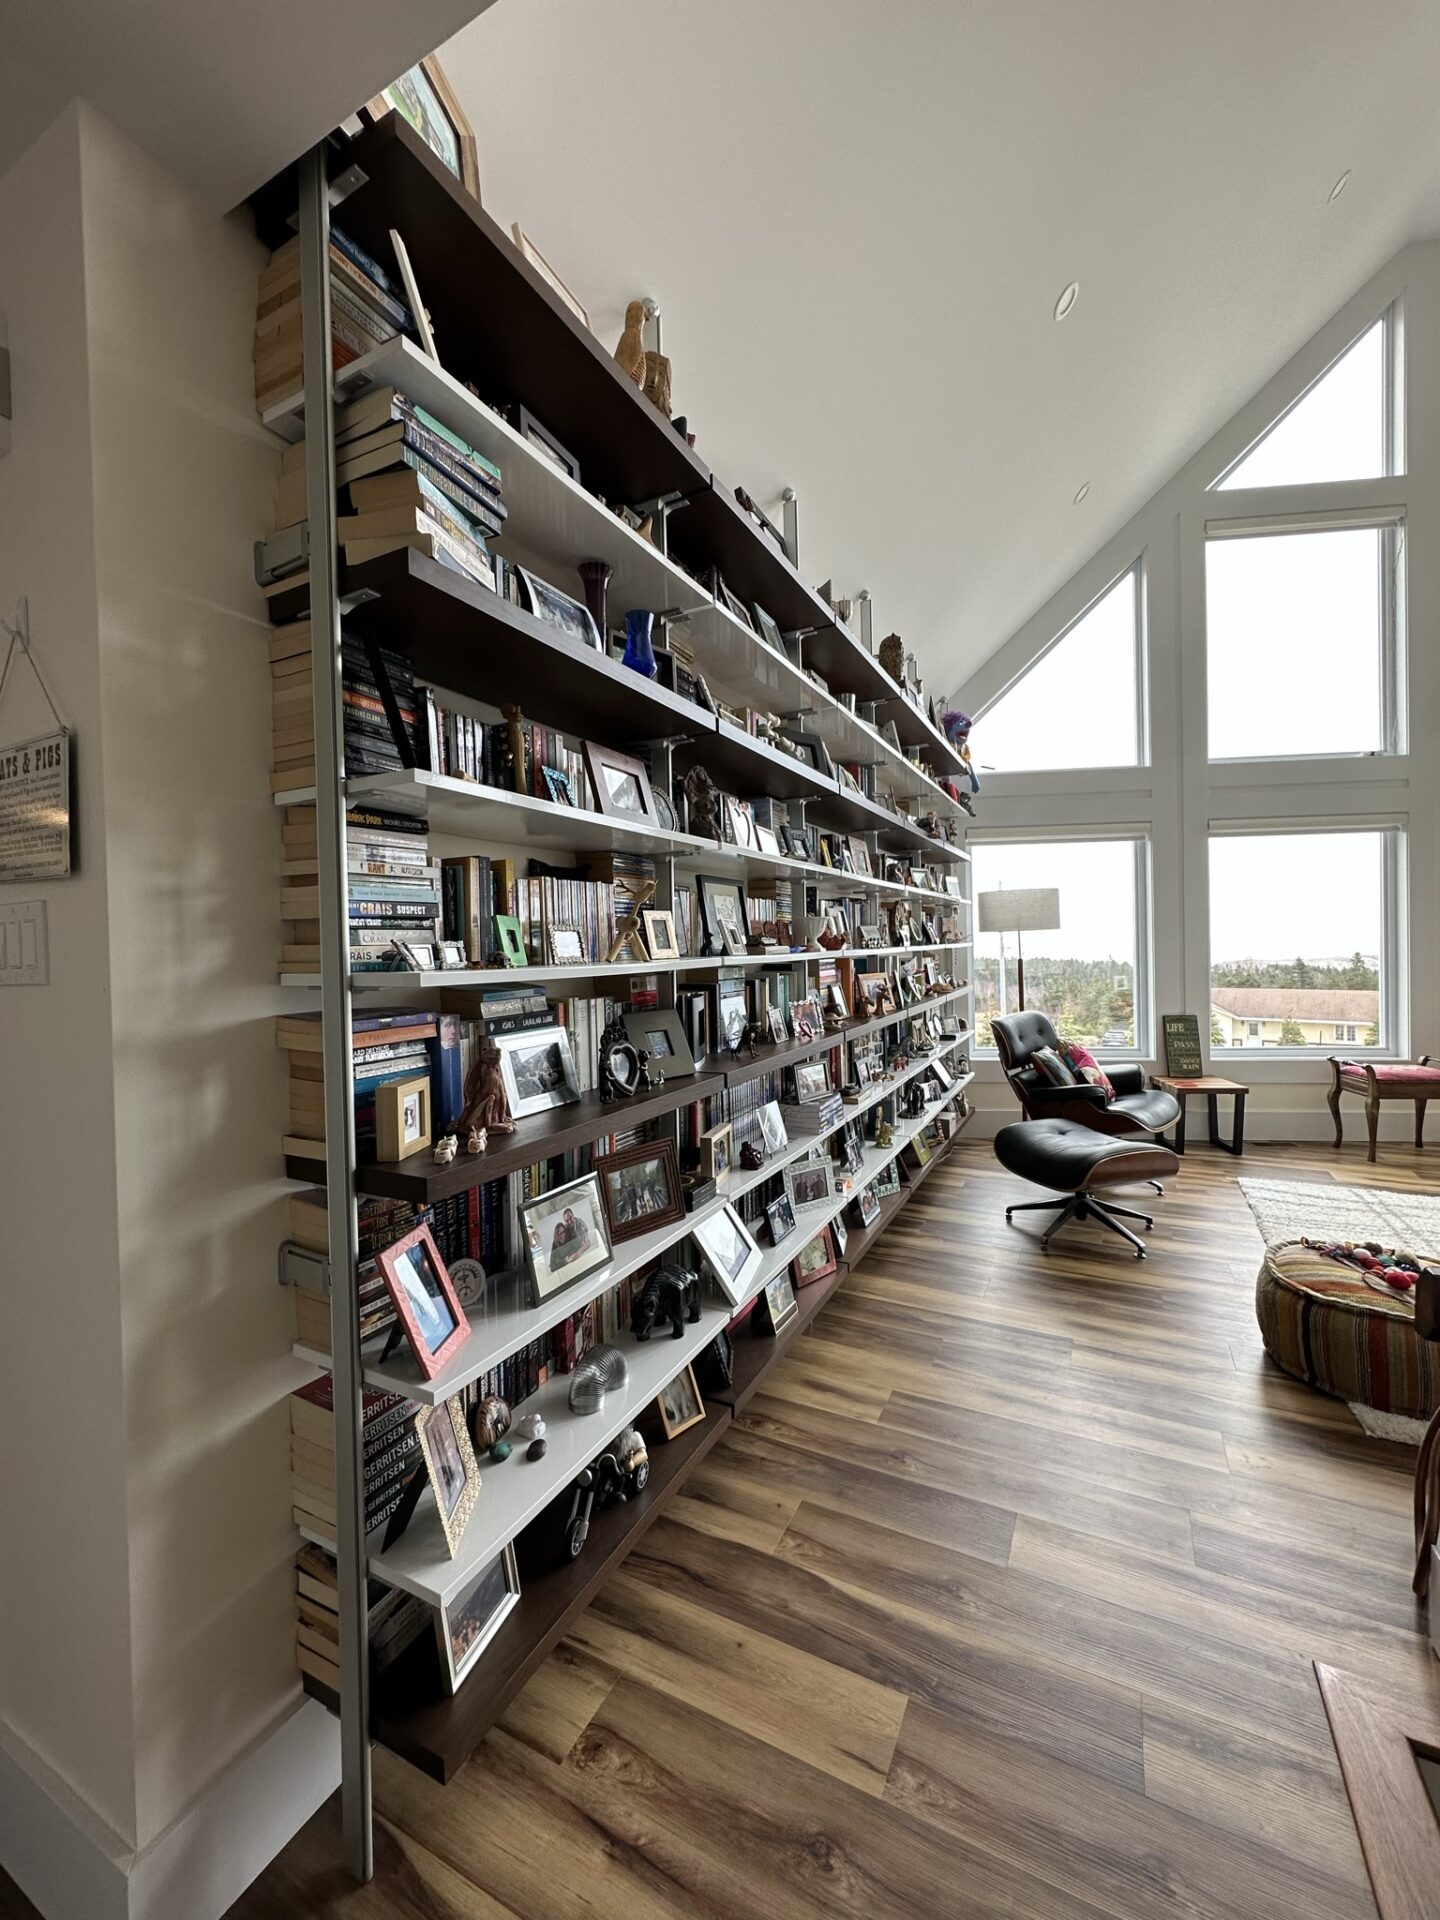 A spacious room with a large bookshelf wall filled with books, photos, and objects, wooden flooring, large windows, and a modern lounge chair.